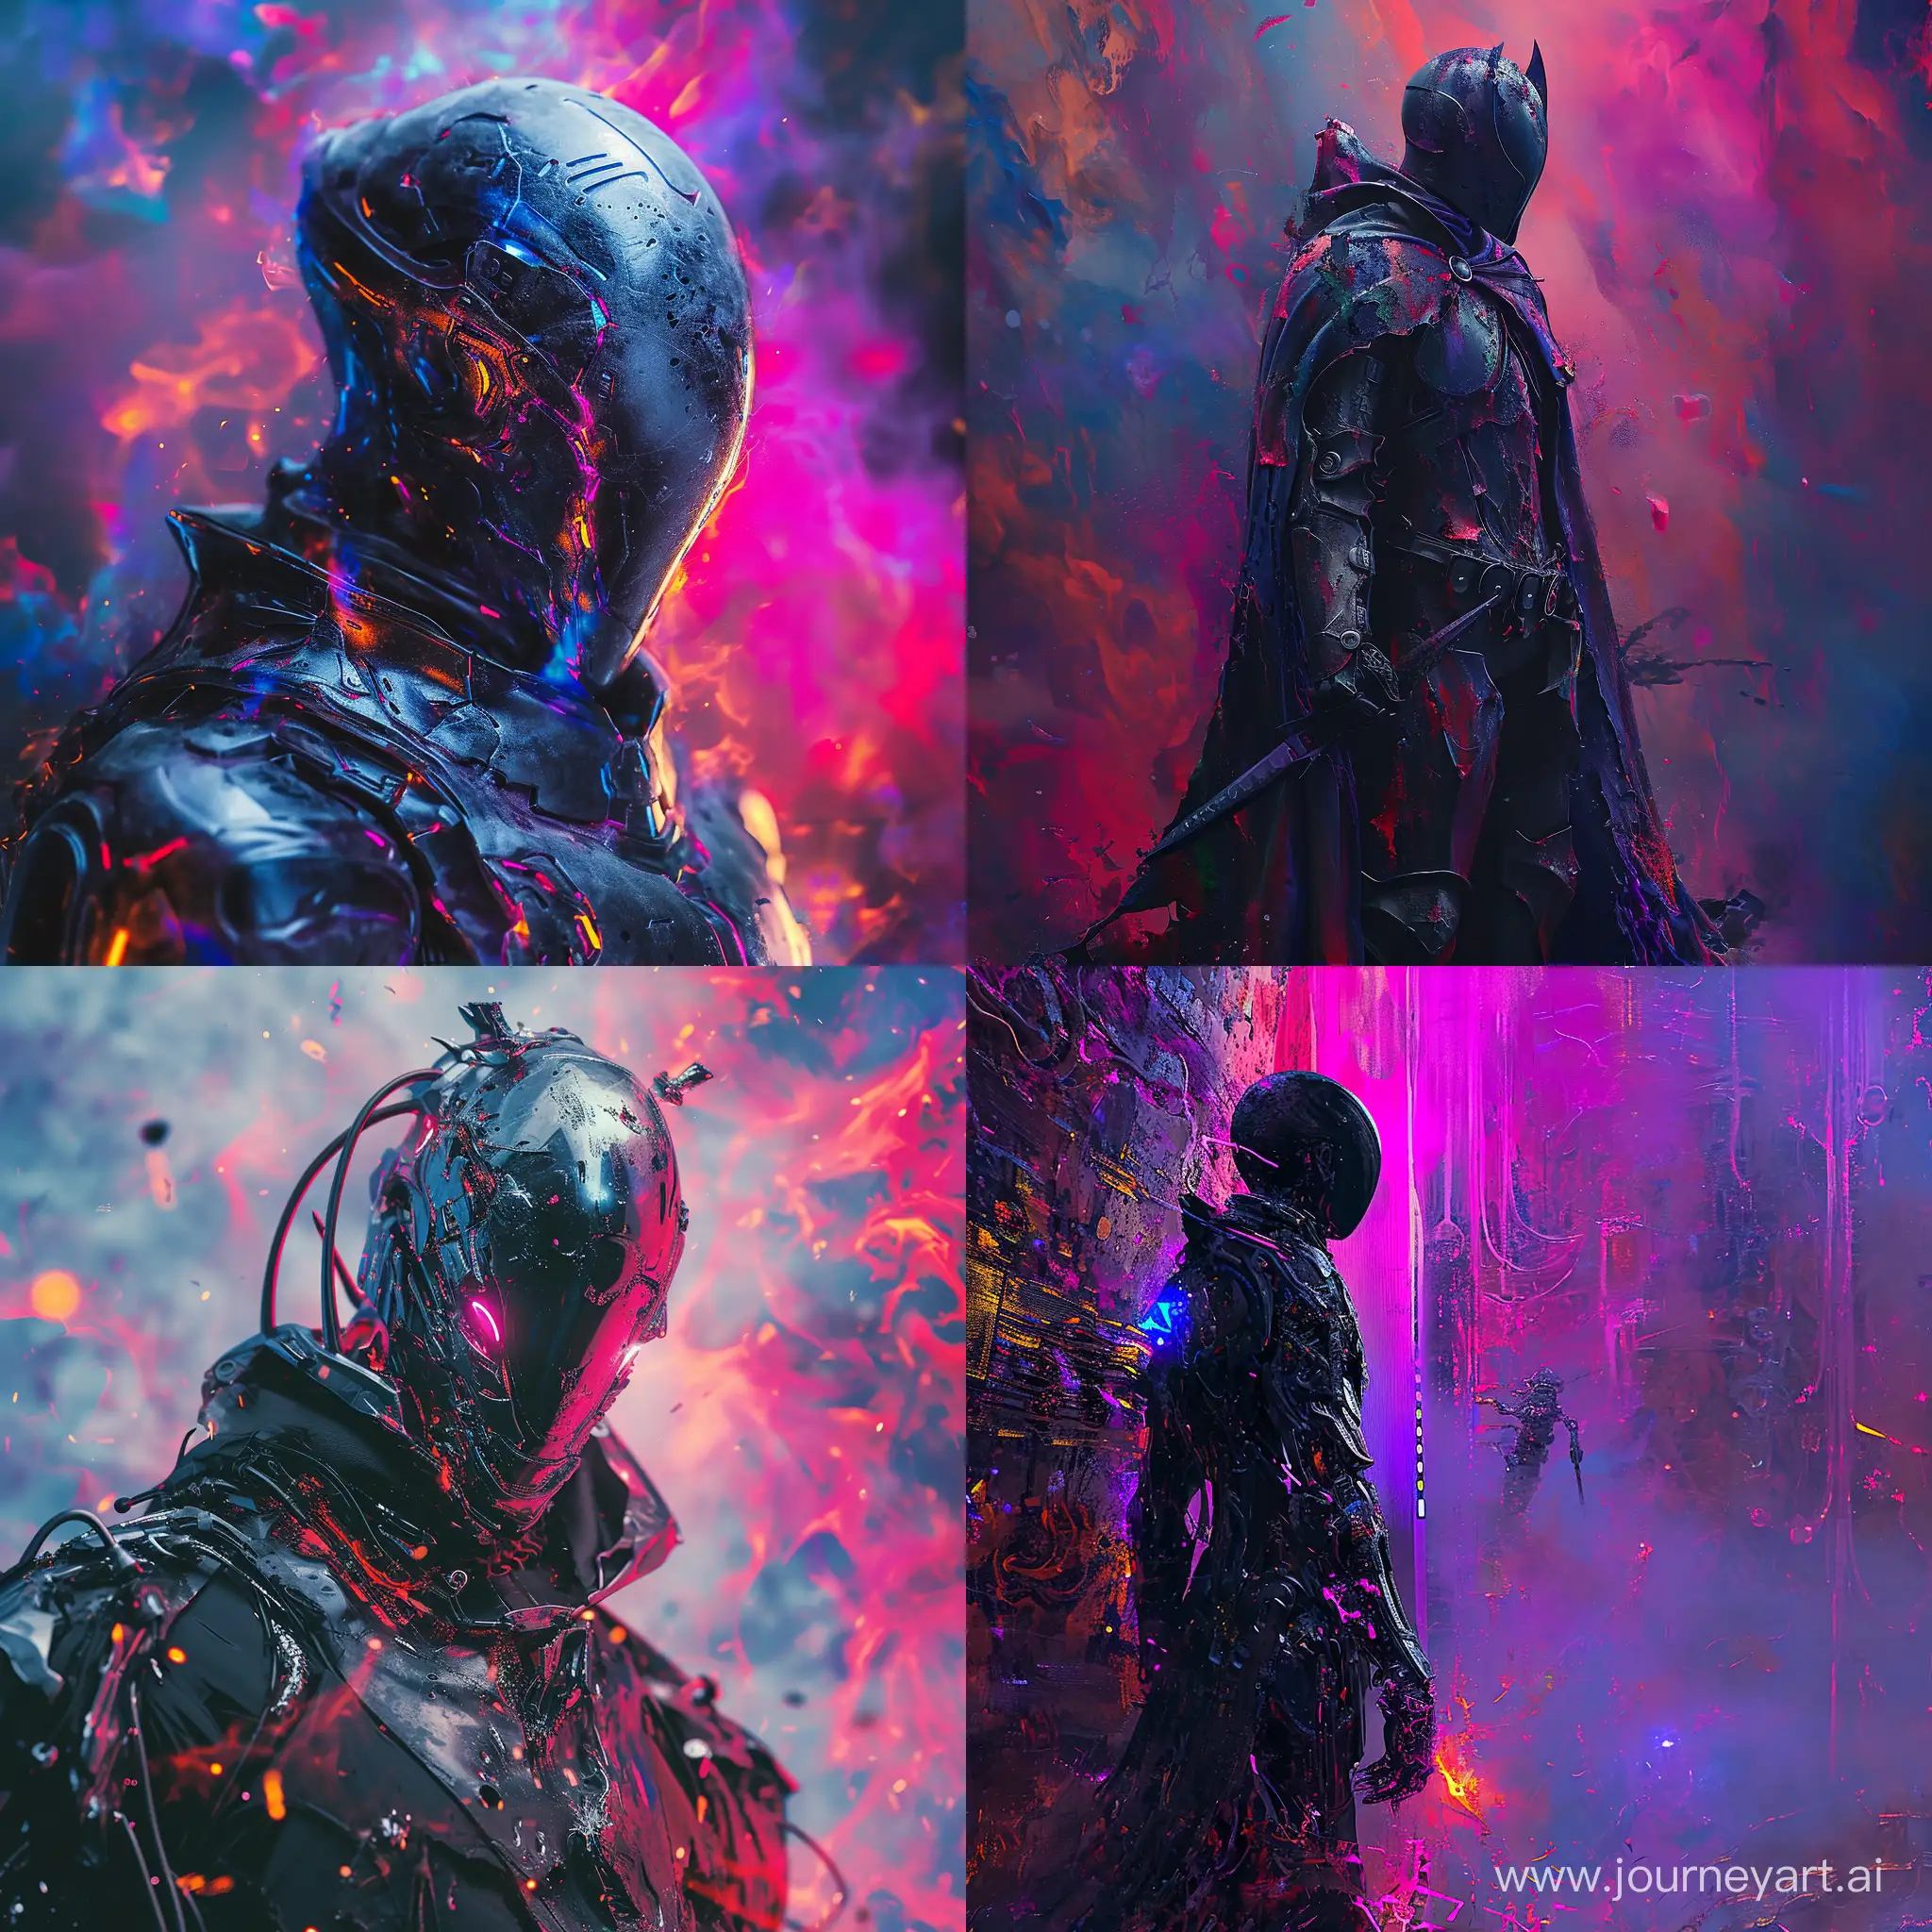 8K, V-Ray, Full length portrait, a cybernetic black knight in unusual fantasy armor, in cyberpunk style, ::1.1, on the background explosion of colors